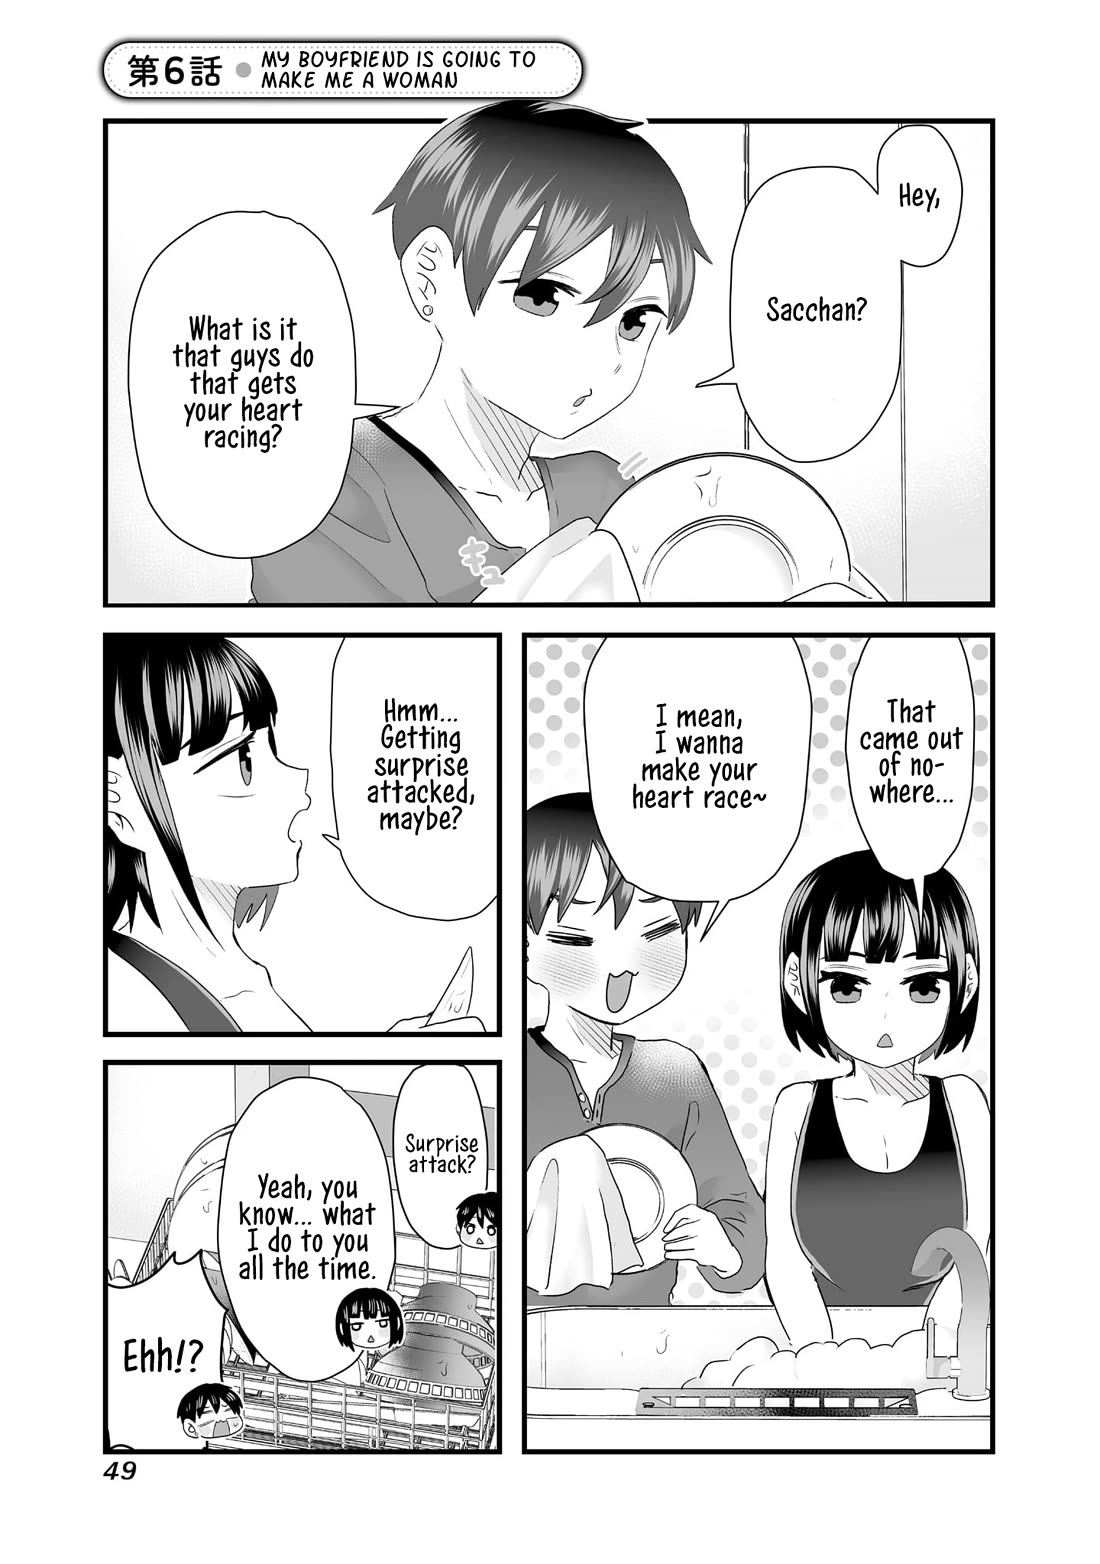 Sacchan and Ken-chan Are Going at it Again - chapter 6 - #1